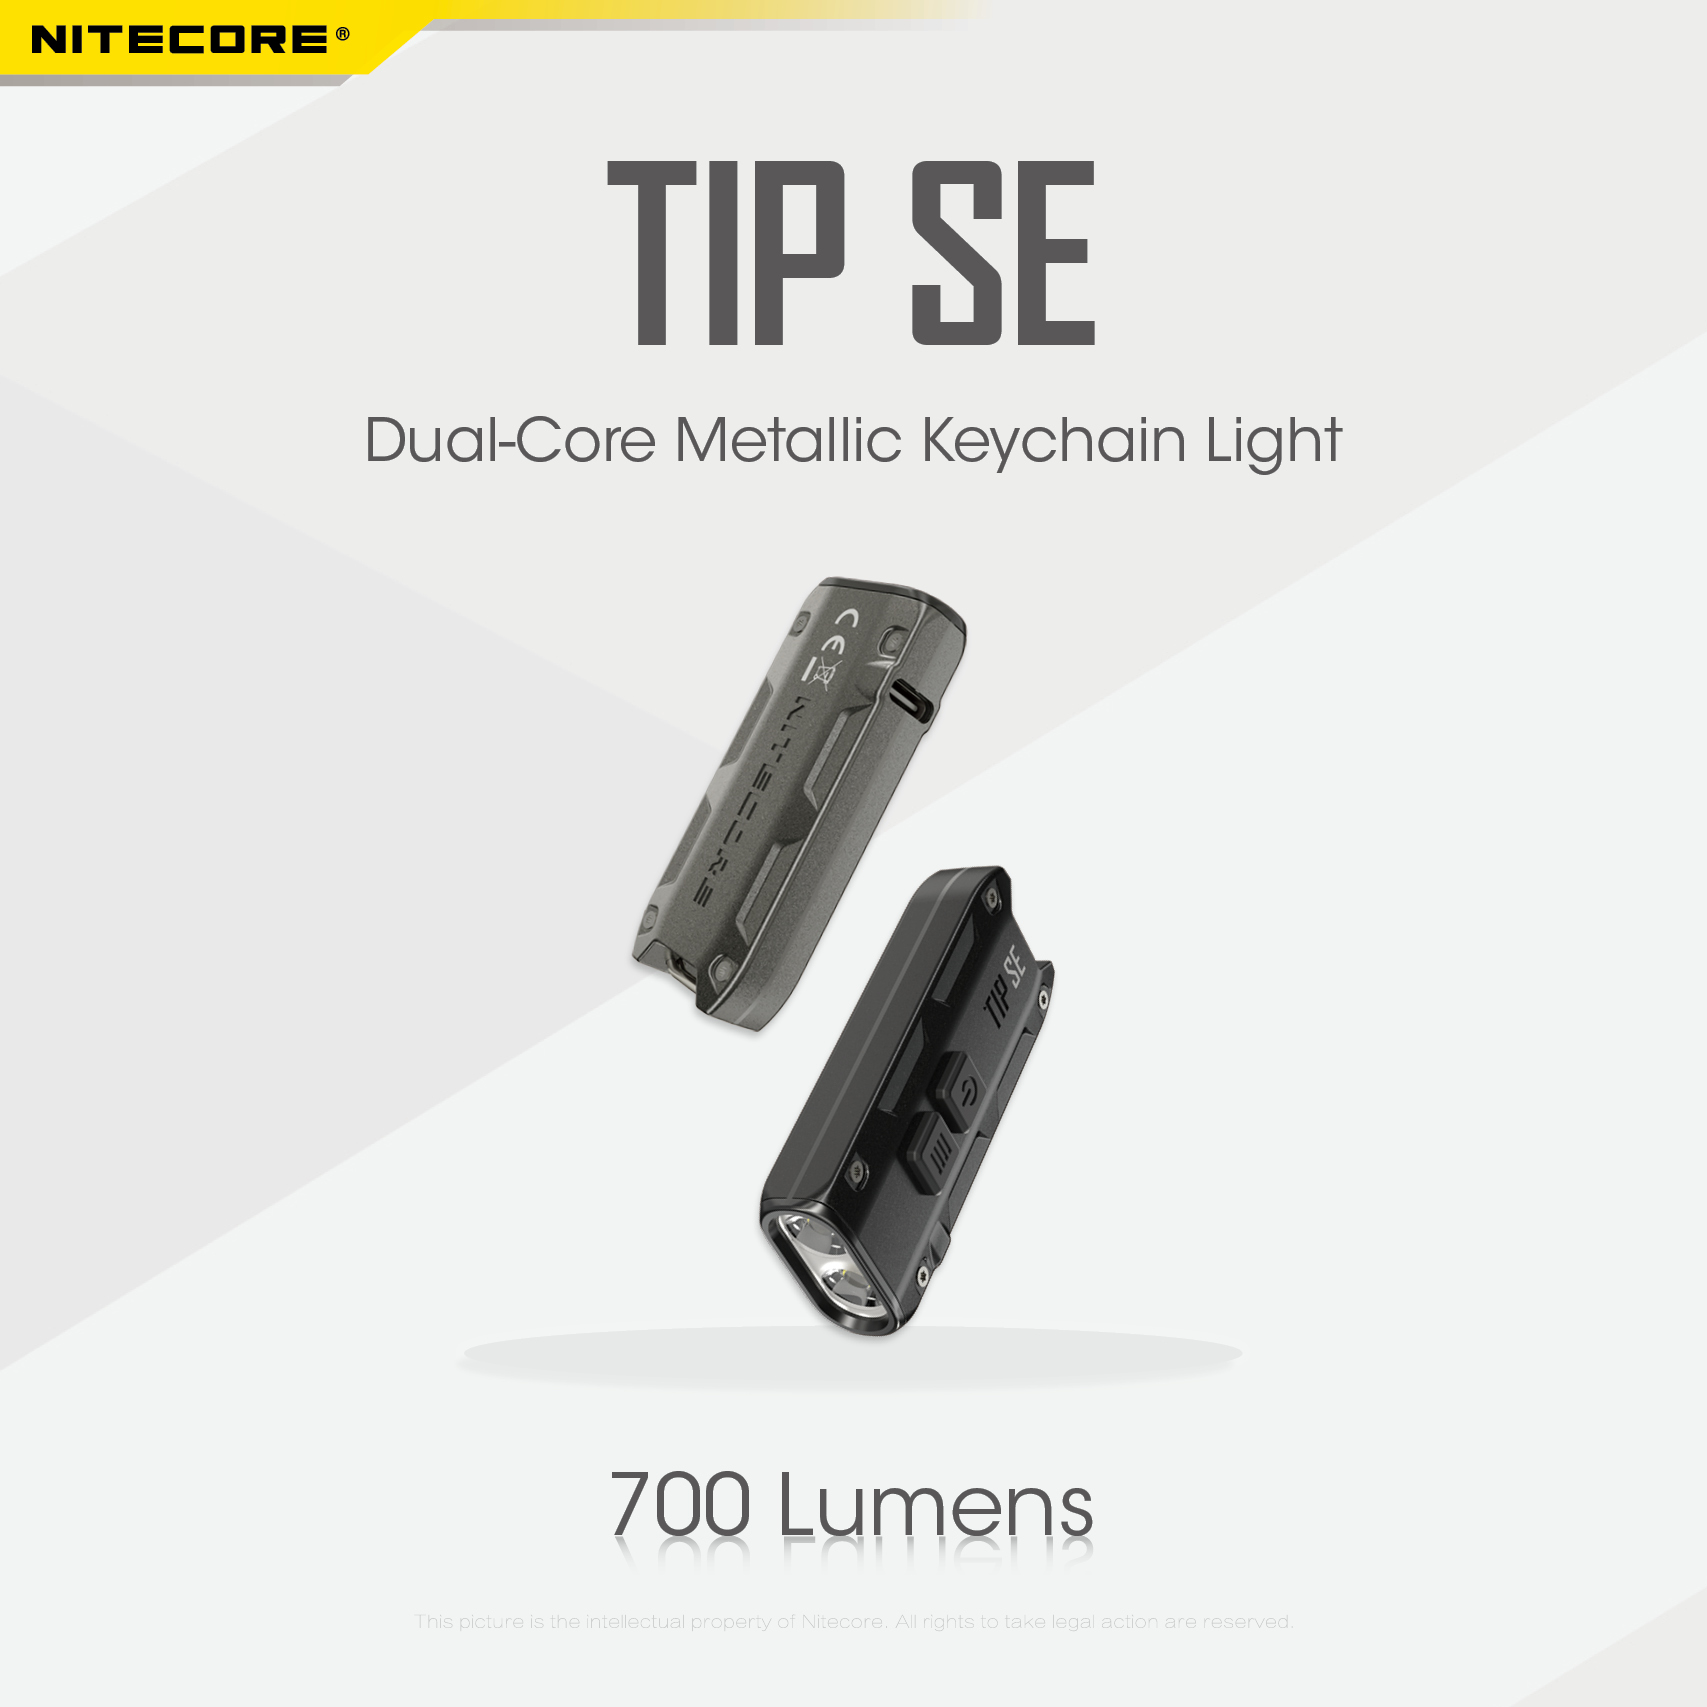 NITECORE-TIP-SE-700LM-P8-Dual-Light-LED-Keychain-Flashlight-Type-C-Rechargeable-QC-Every-Day-Carry-M-1976045-1